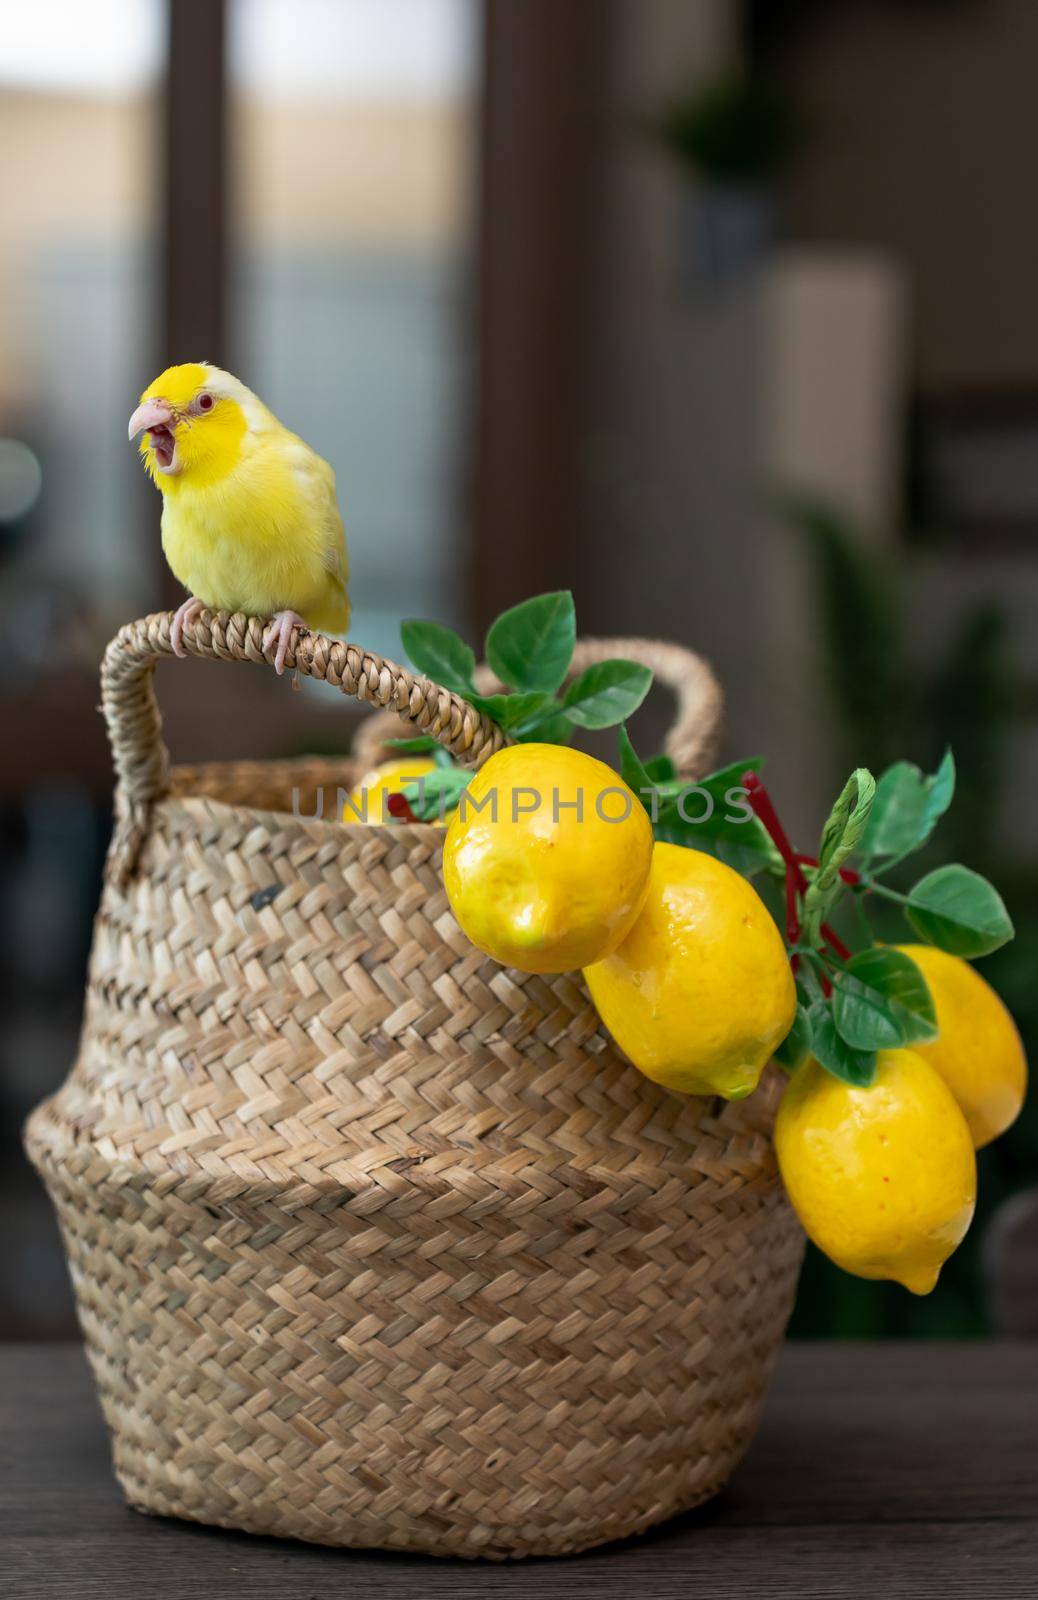 Forpus little tiny Parrots bird is perched on the wicker basket and artificial lemon. by sirawit99